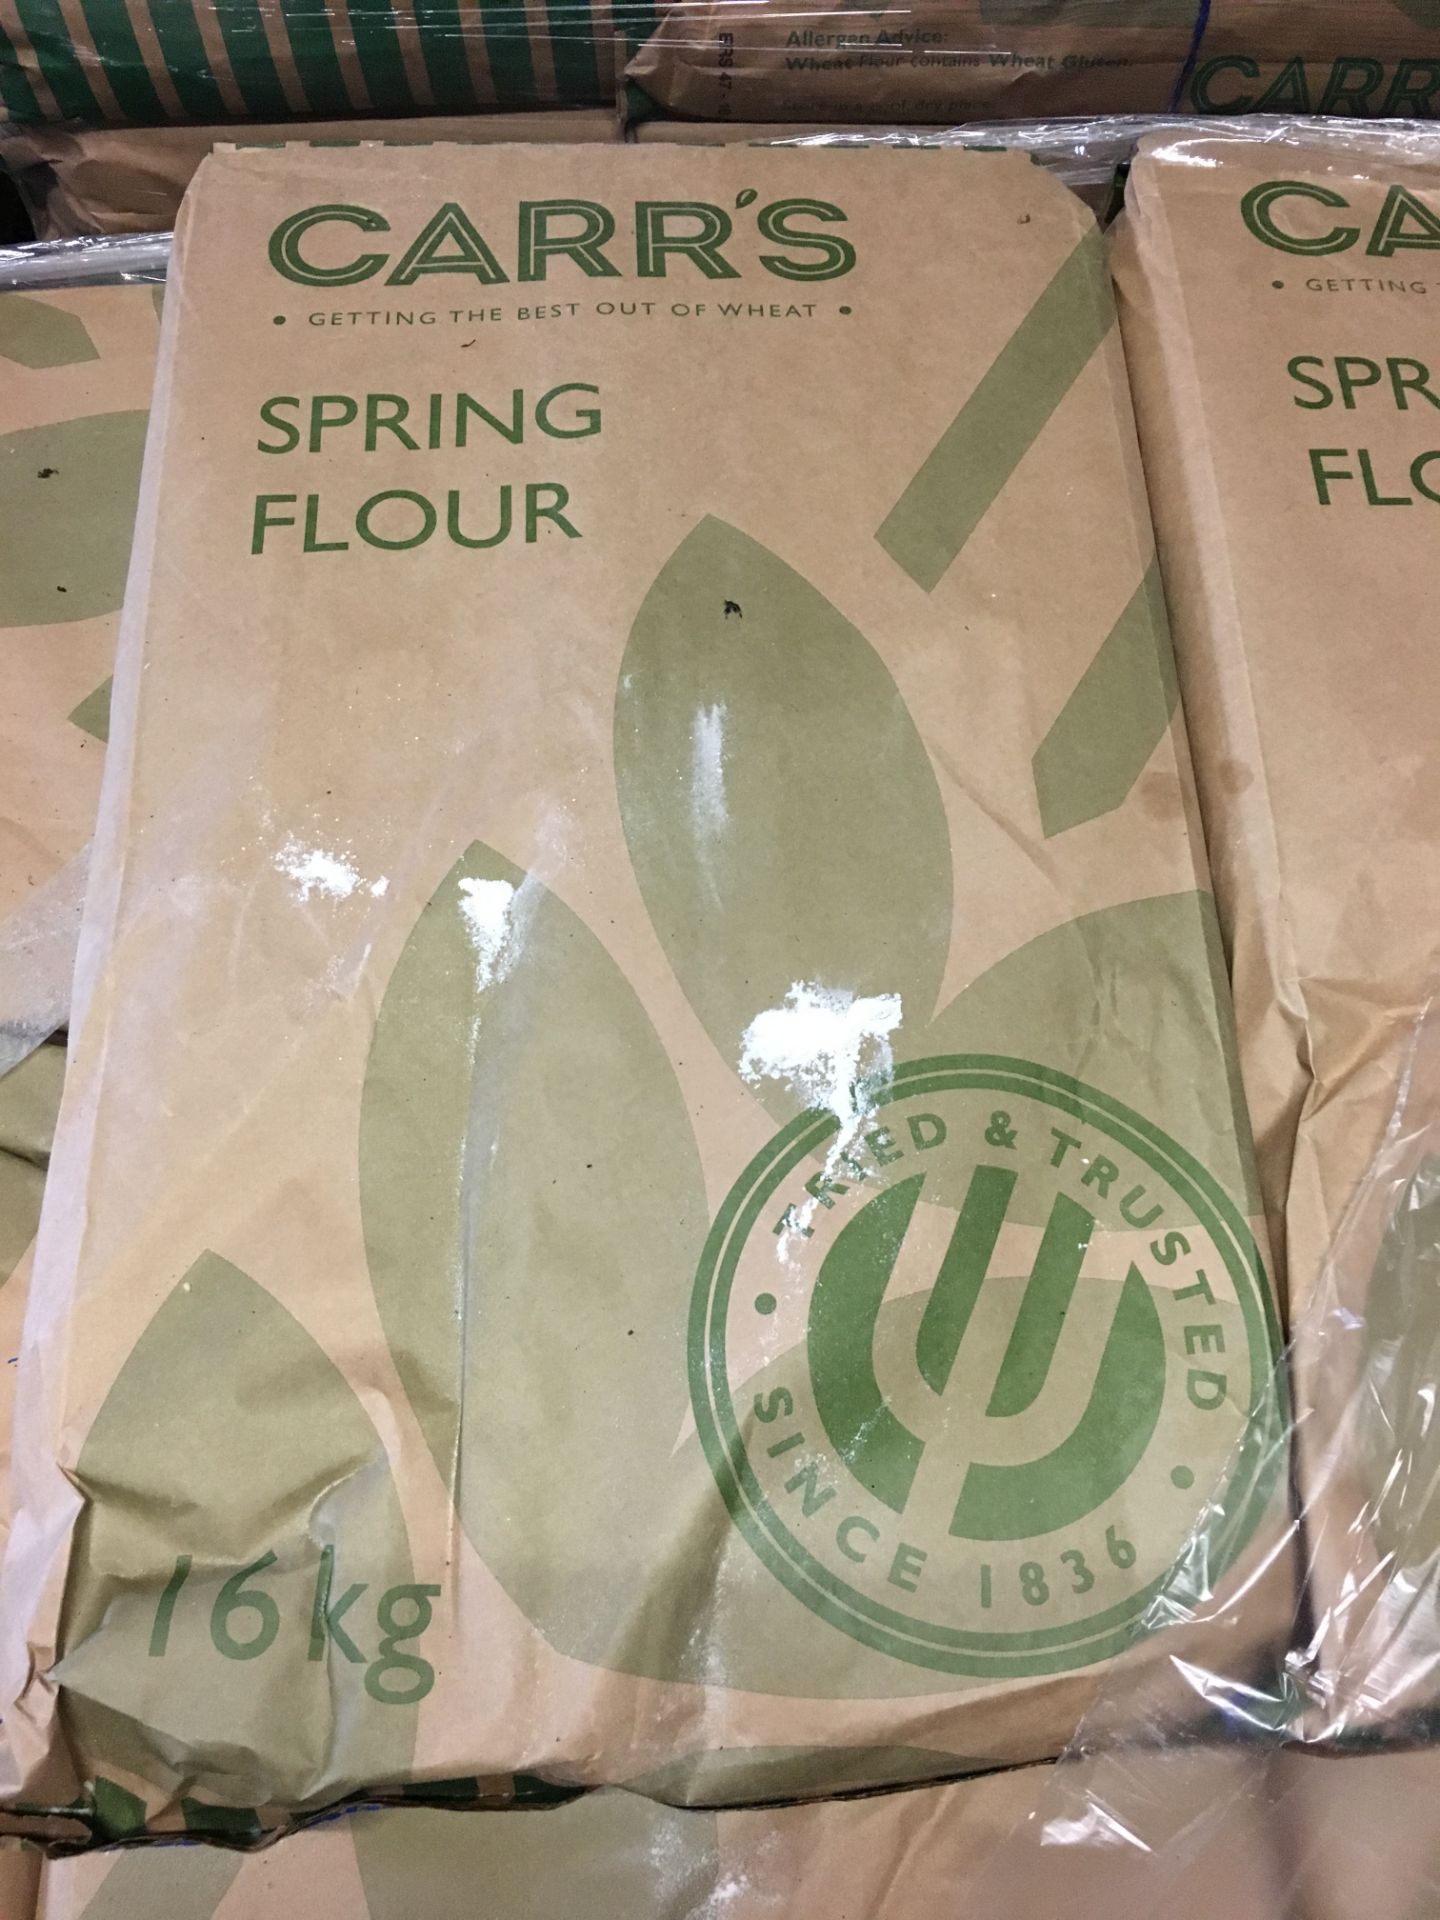 4 x Pallets of Carrs Spring Flour - Approximately 65 Bags per Pallet - Image 3 of 4